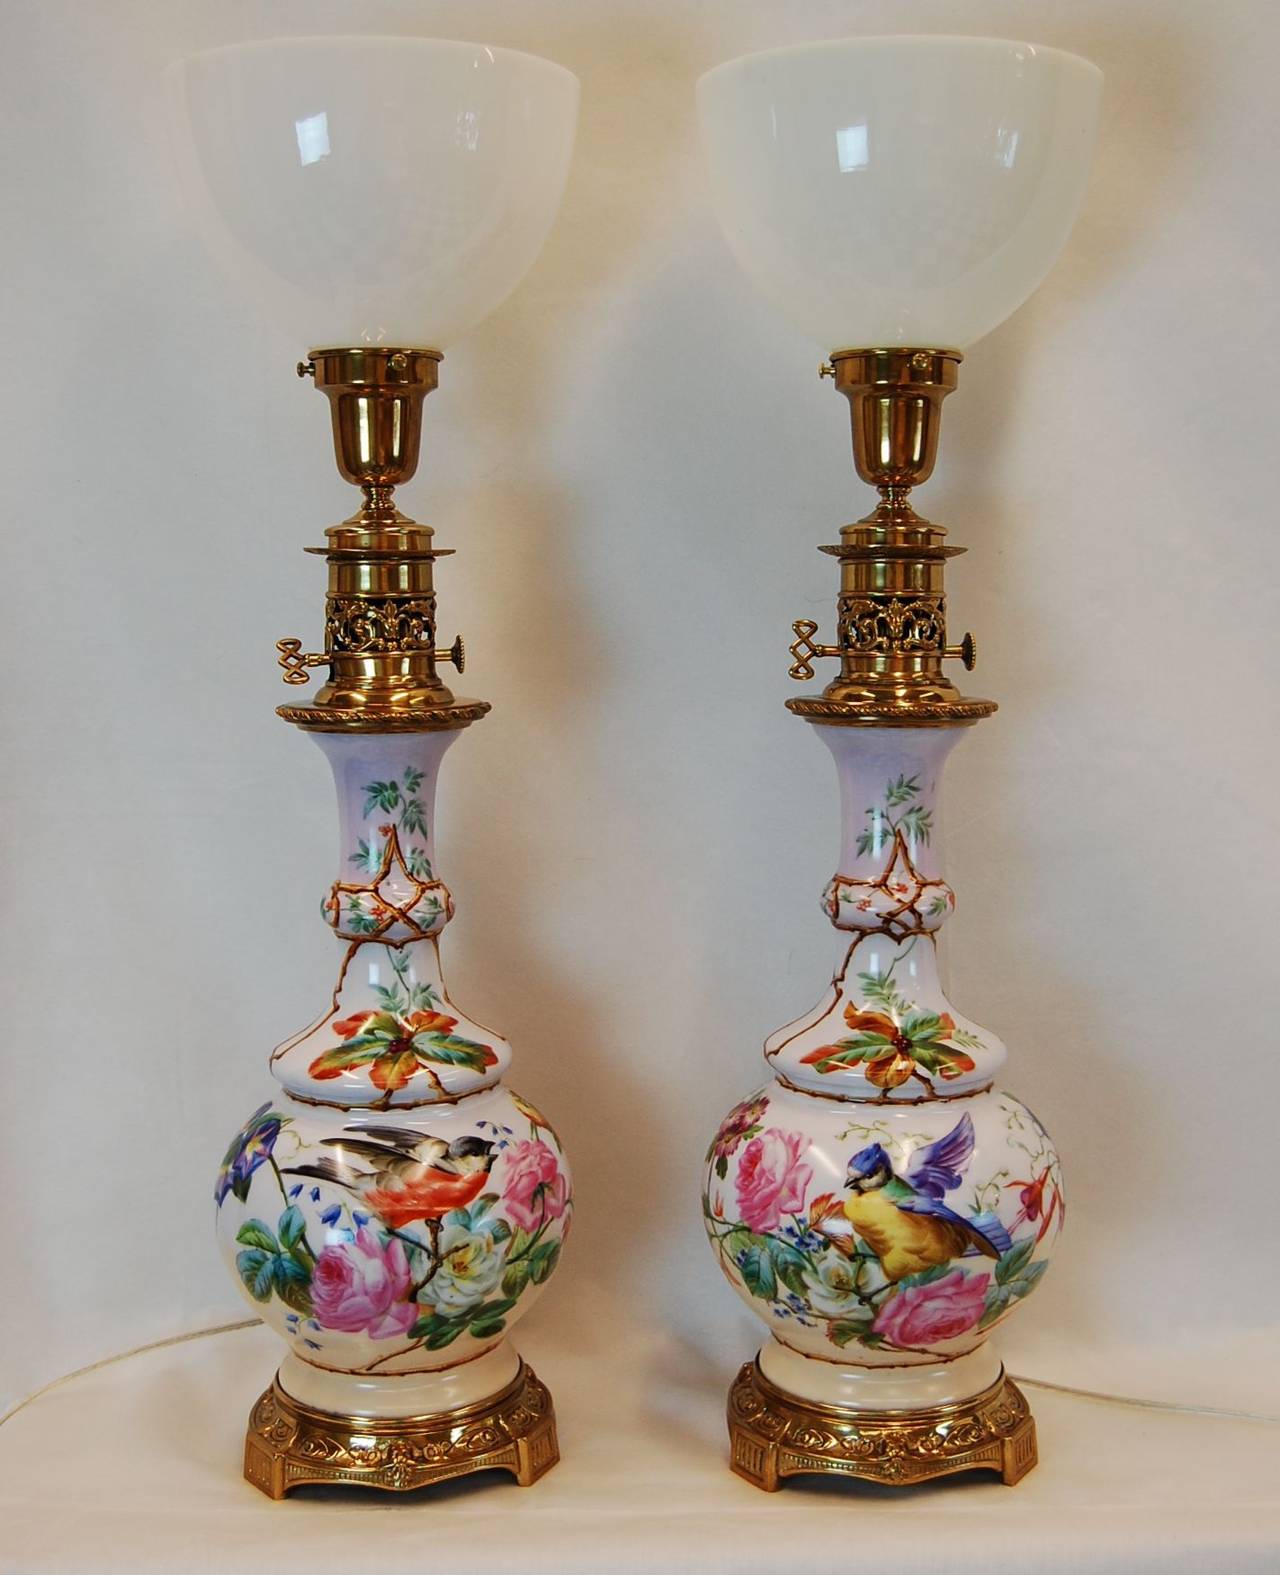 Beautiful pair of hand-painted English porcelain floral and bird decorated oil lamps with original brass bases and fittings, circa 1870-1880. Newly cleaned, polished and rewired with three-way sockets.